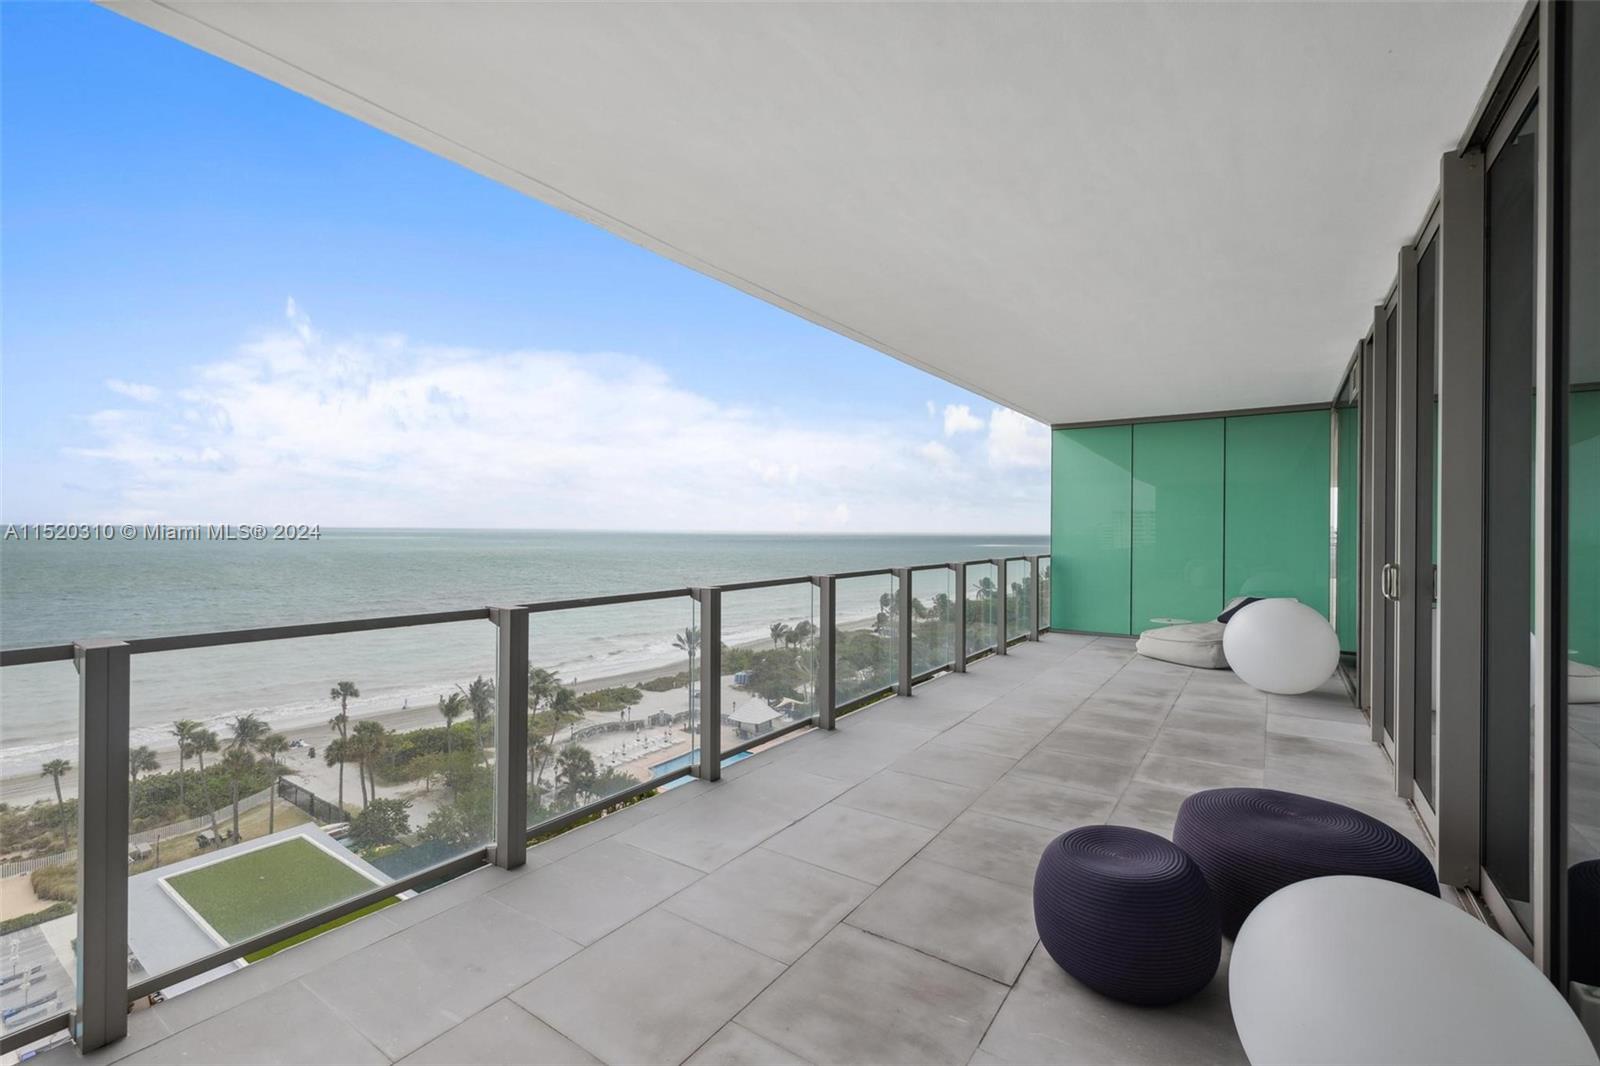 Welcome to this outstanding waterfront design by renowned architect Ramon Alonso at Oceana the most exclusive building in Key Biscayne. A private elevator leads you into this spectacular 4B + Maid’s quarters and 5.5Bath unit. Its Floor-to-ceiling windows and expansive terraces, facing east and west, allow you to enjoy the most spectacular sunrises and sunsets. No detail has been spared in this flow-through floorplan with high end appliances, remote shades and black outs, laundry room and the highest quality materials. The fourth bedroom with its pivoting walls can also be used as an open Tv room. 500 foot private beach, heated pool, restaurant, gym, spa, yoga studio & lap pool, tennis, putting green, beach volleyball , party room, kid’s room, media room and personalized concierge services.